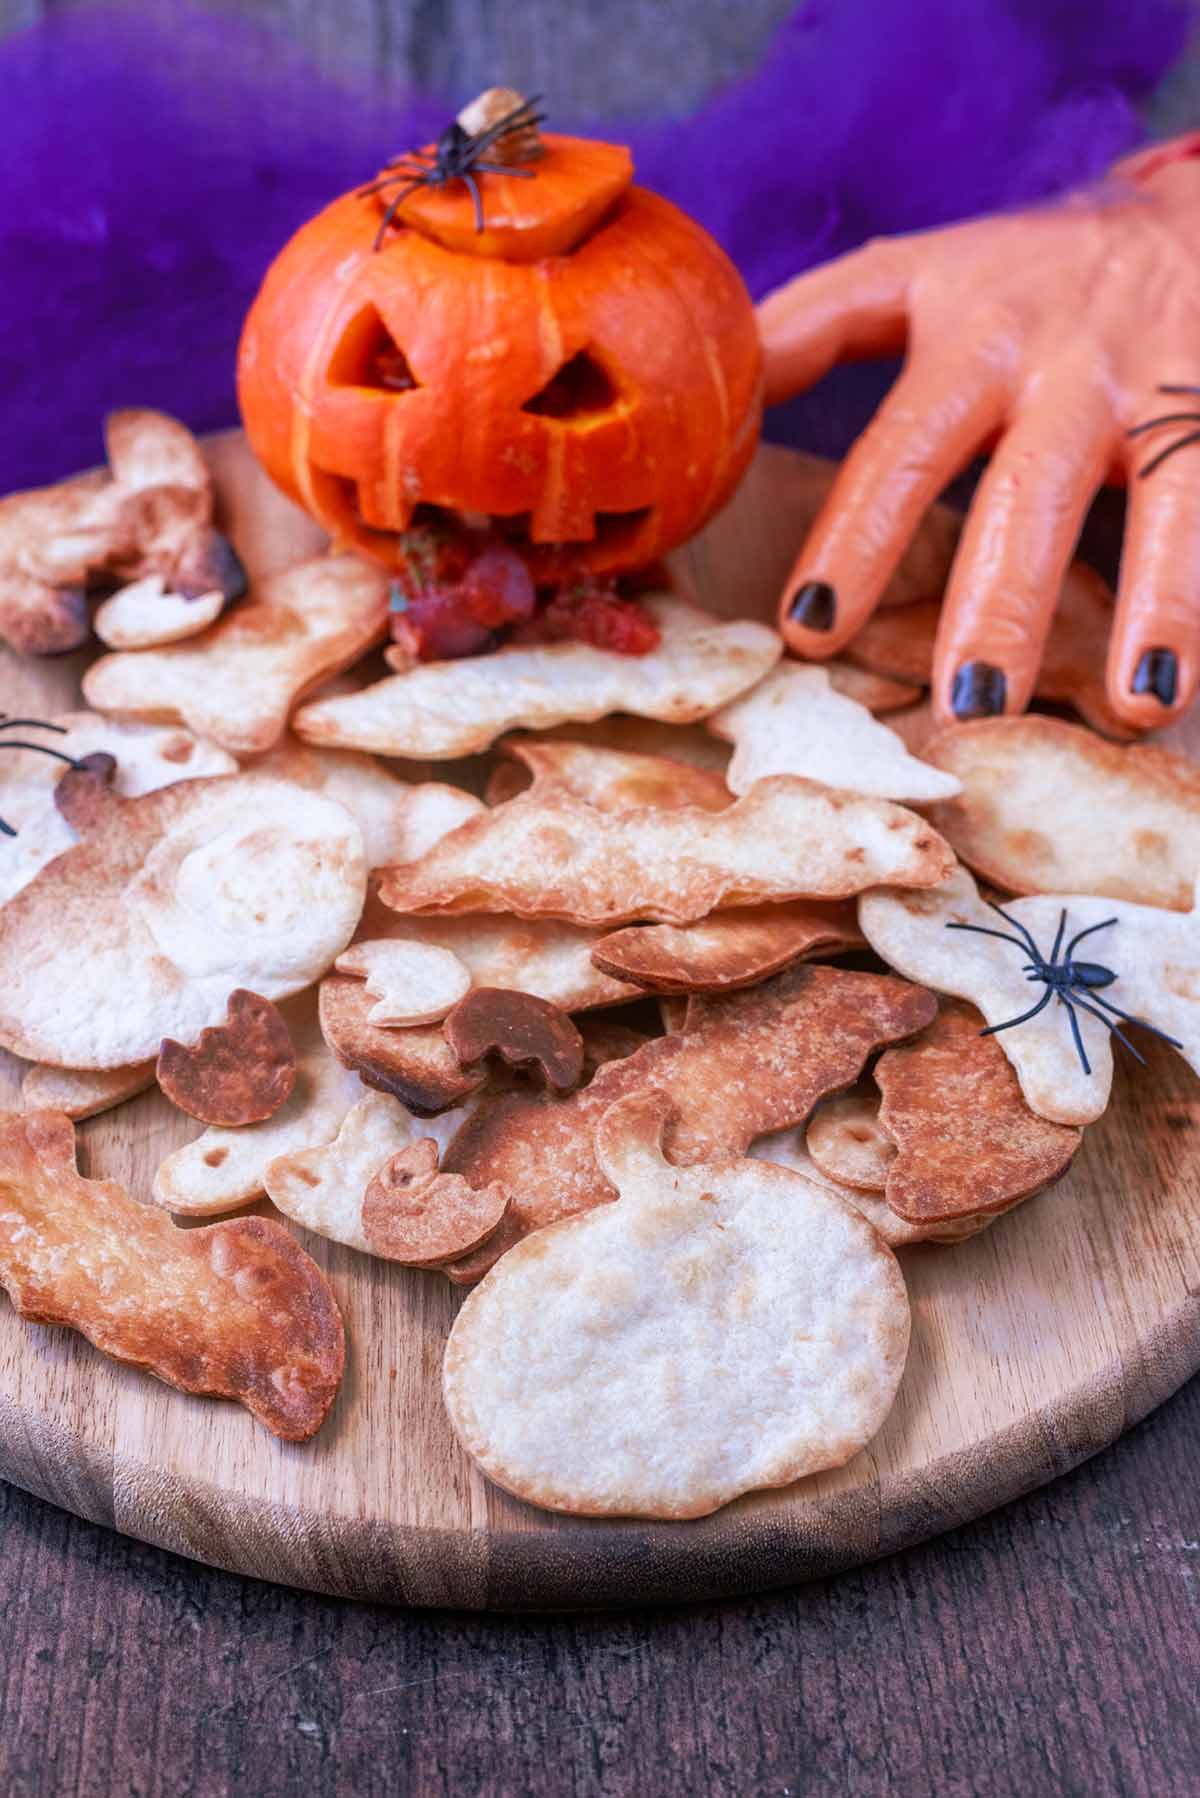 A wooden board covered in halloween shaped tortilla chips with a pumpkin.